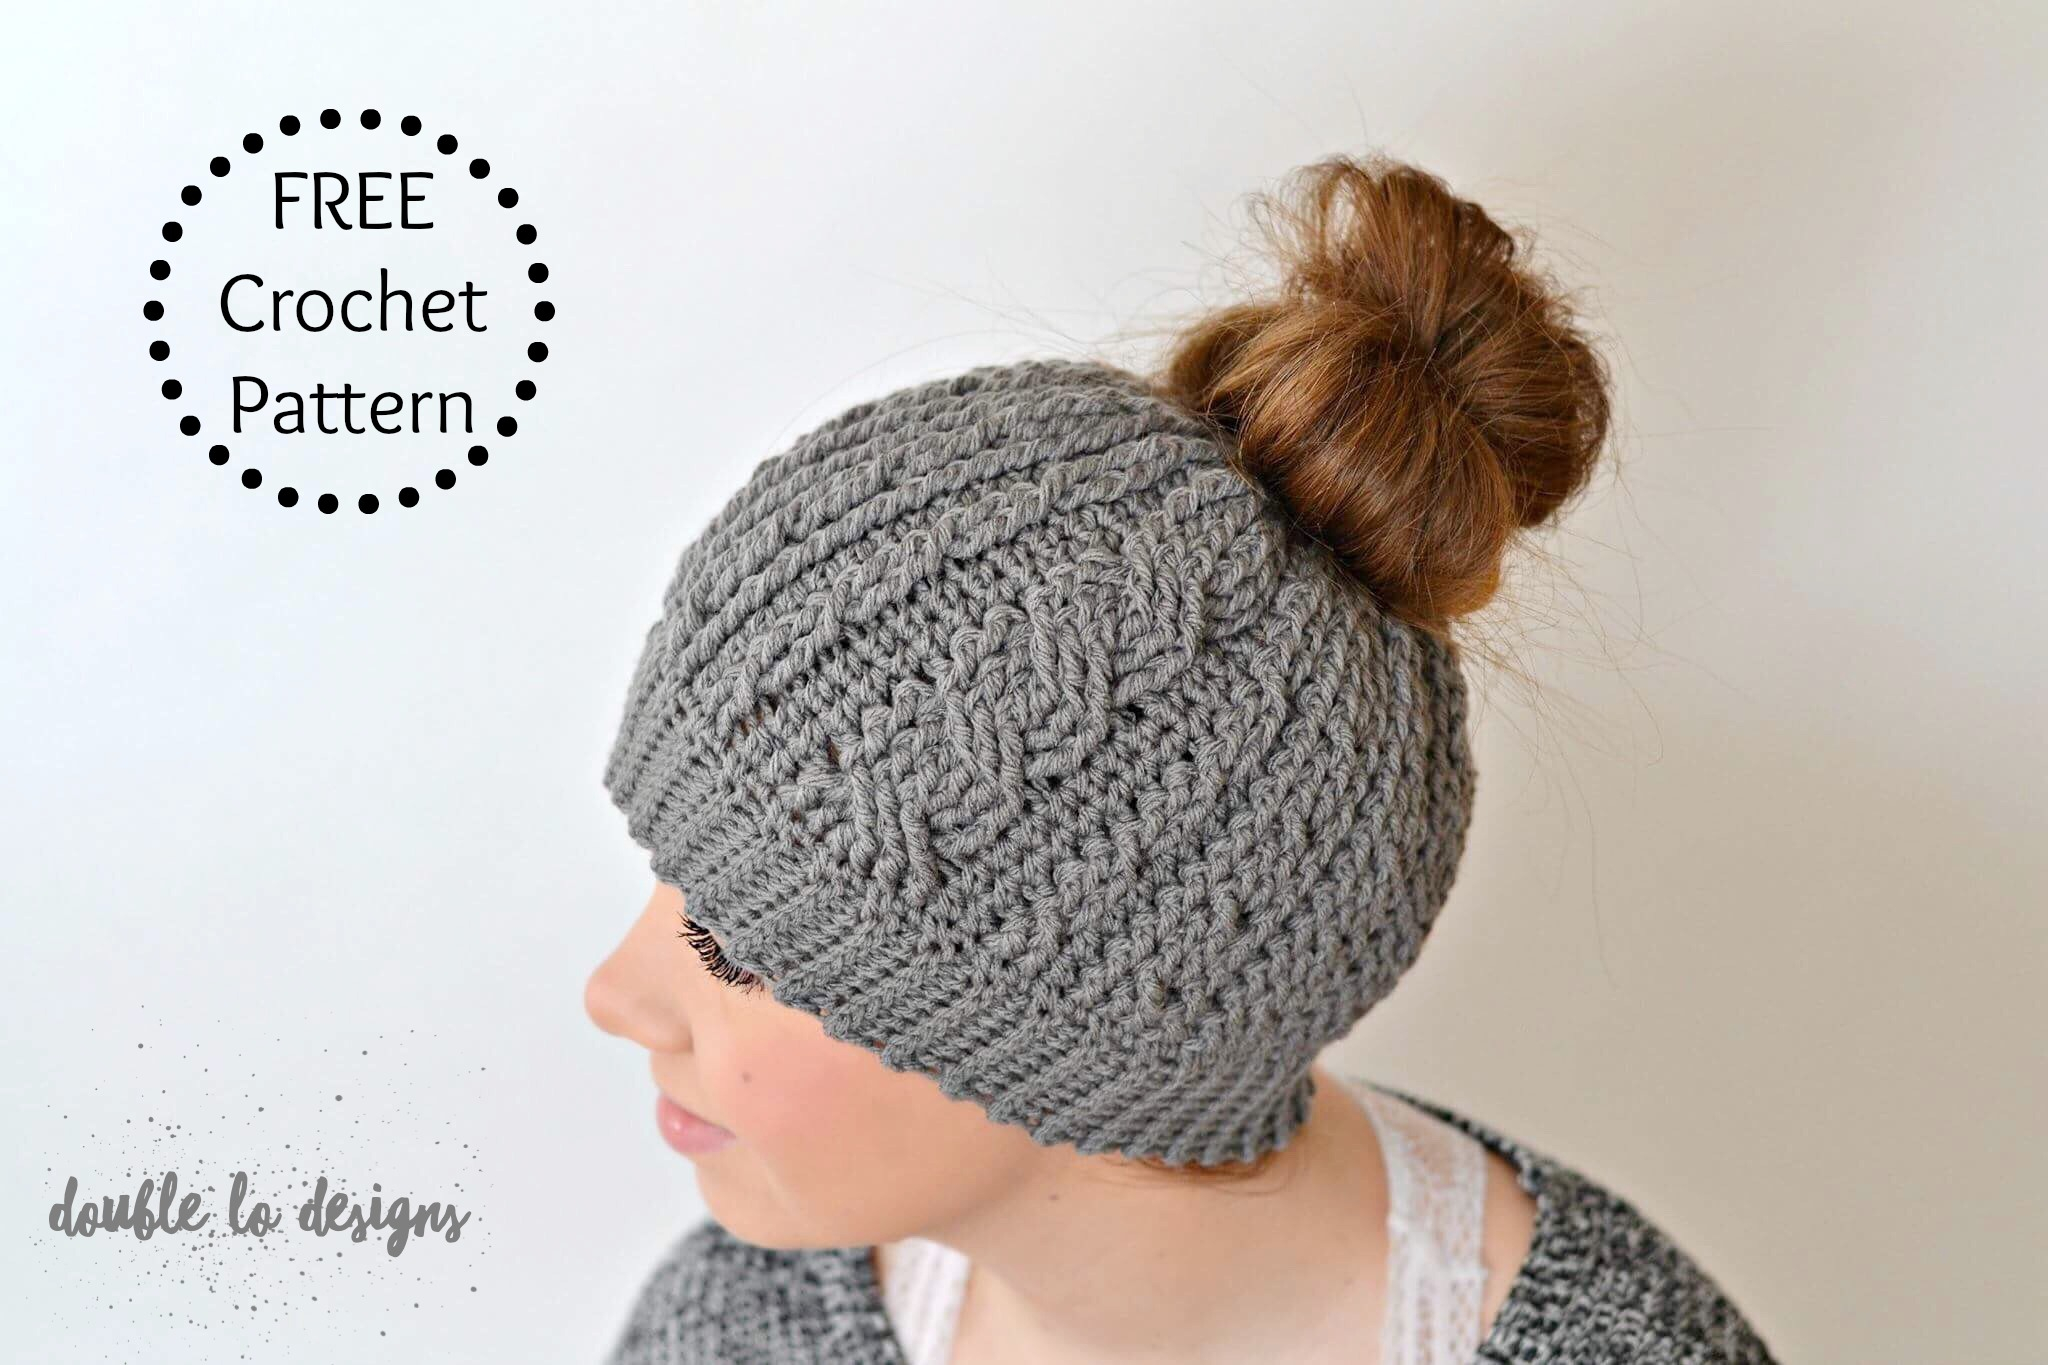 Free Crocheting Patterns Free Crochet Pattern Crochet Cabled Messy Bun Hat Adult Sizes